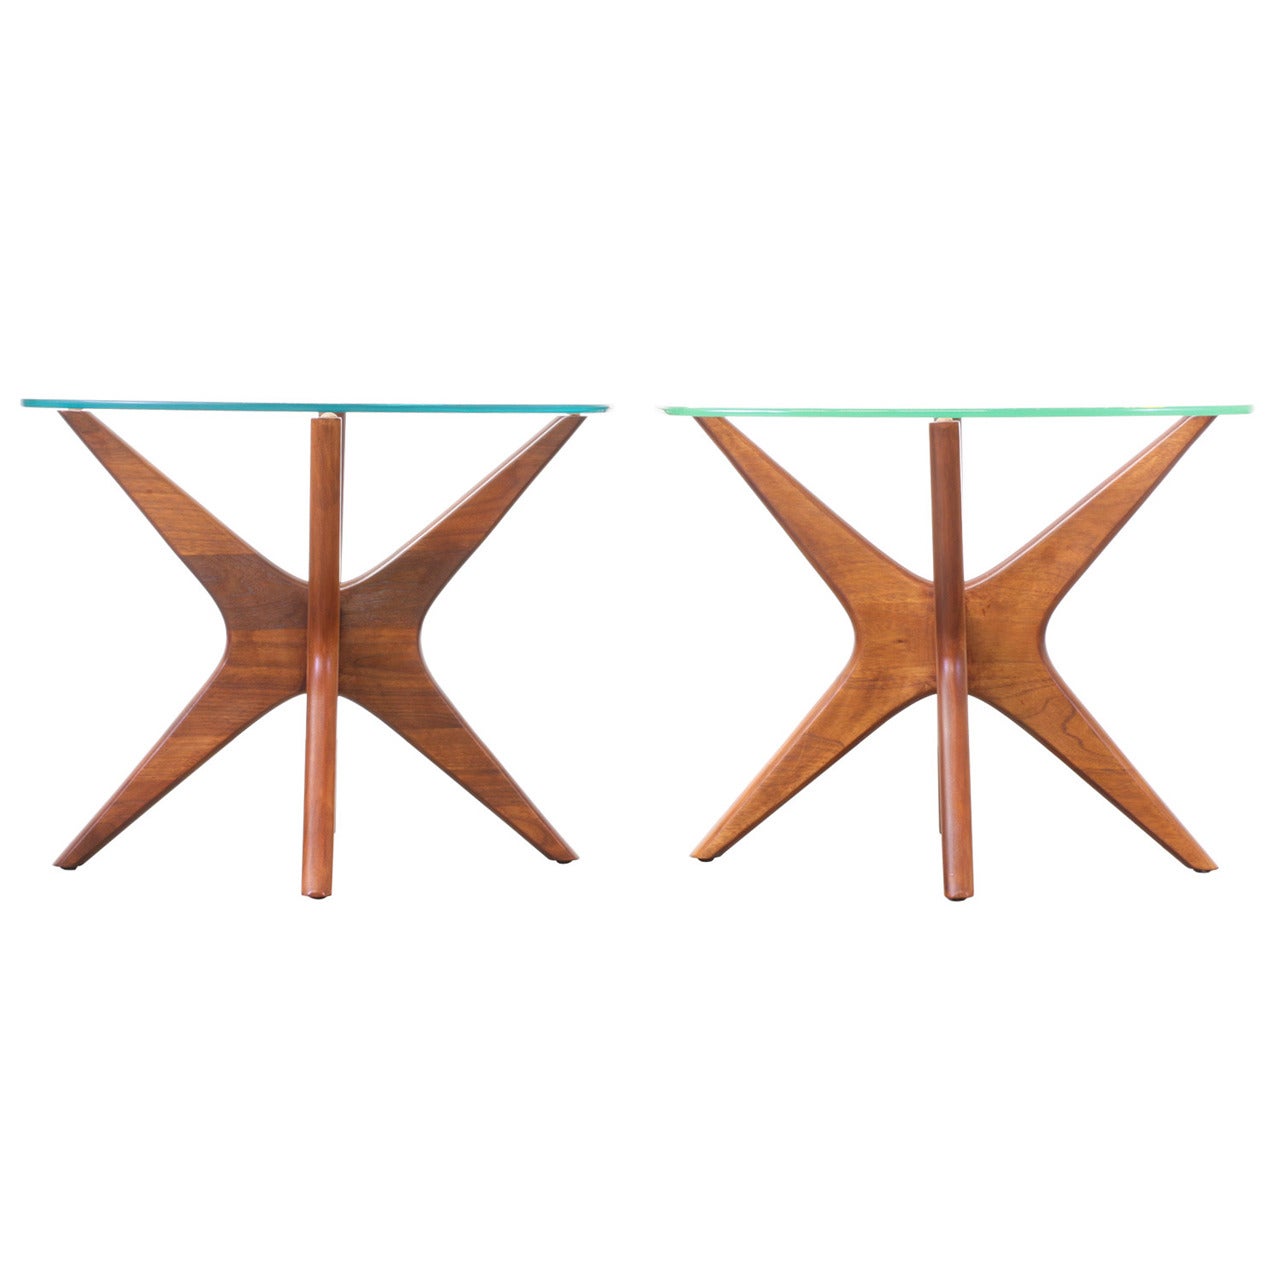 Adrian Pearsall “Jax” Side Tables for Craft Associates